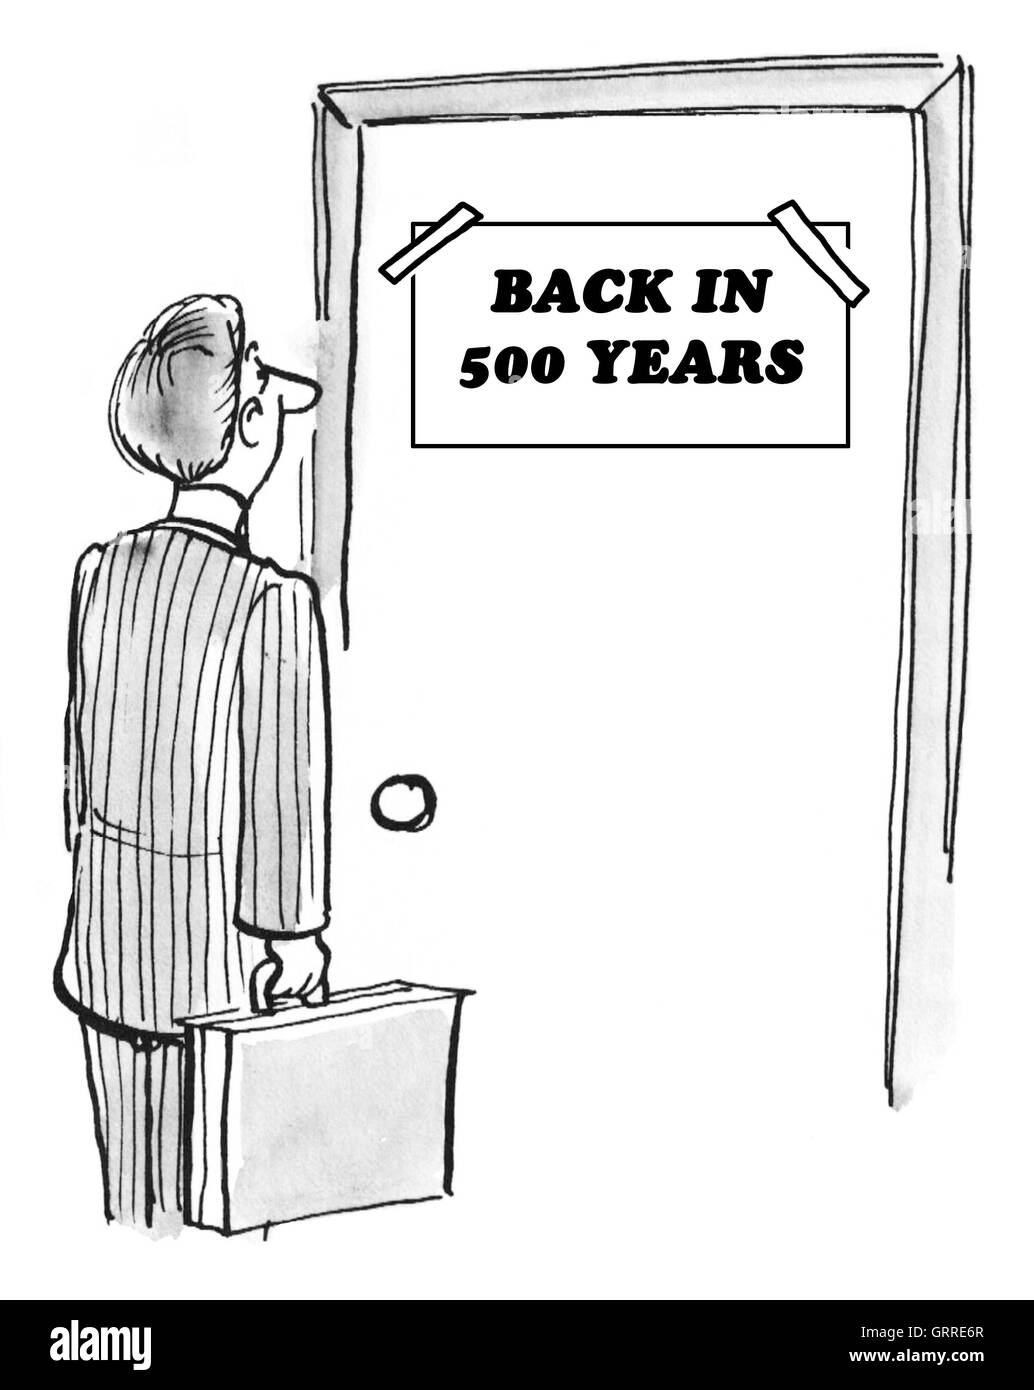 B&W business illustration showing a businessman looking at a sign 'back in 500 years'. Stock Photo